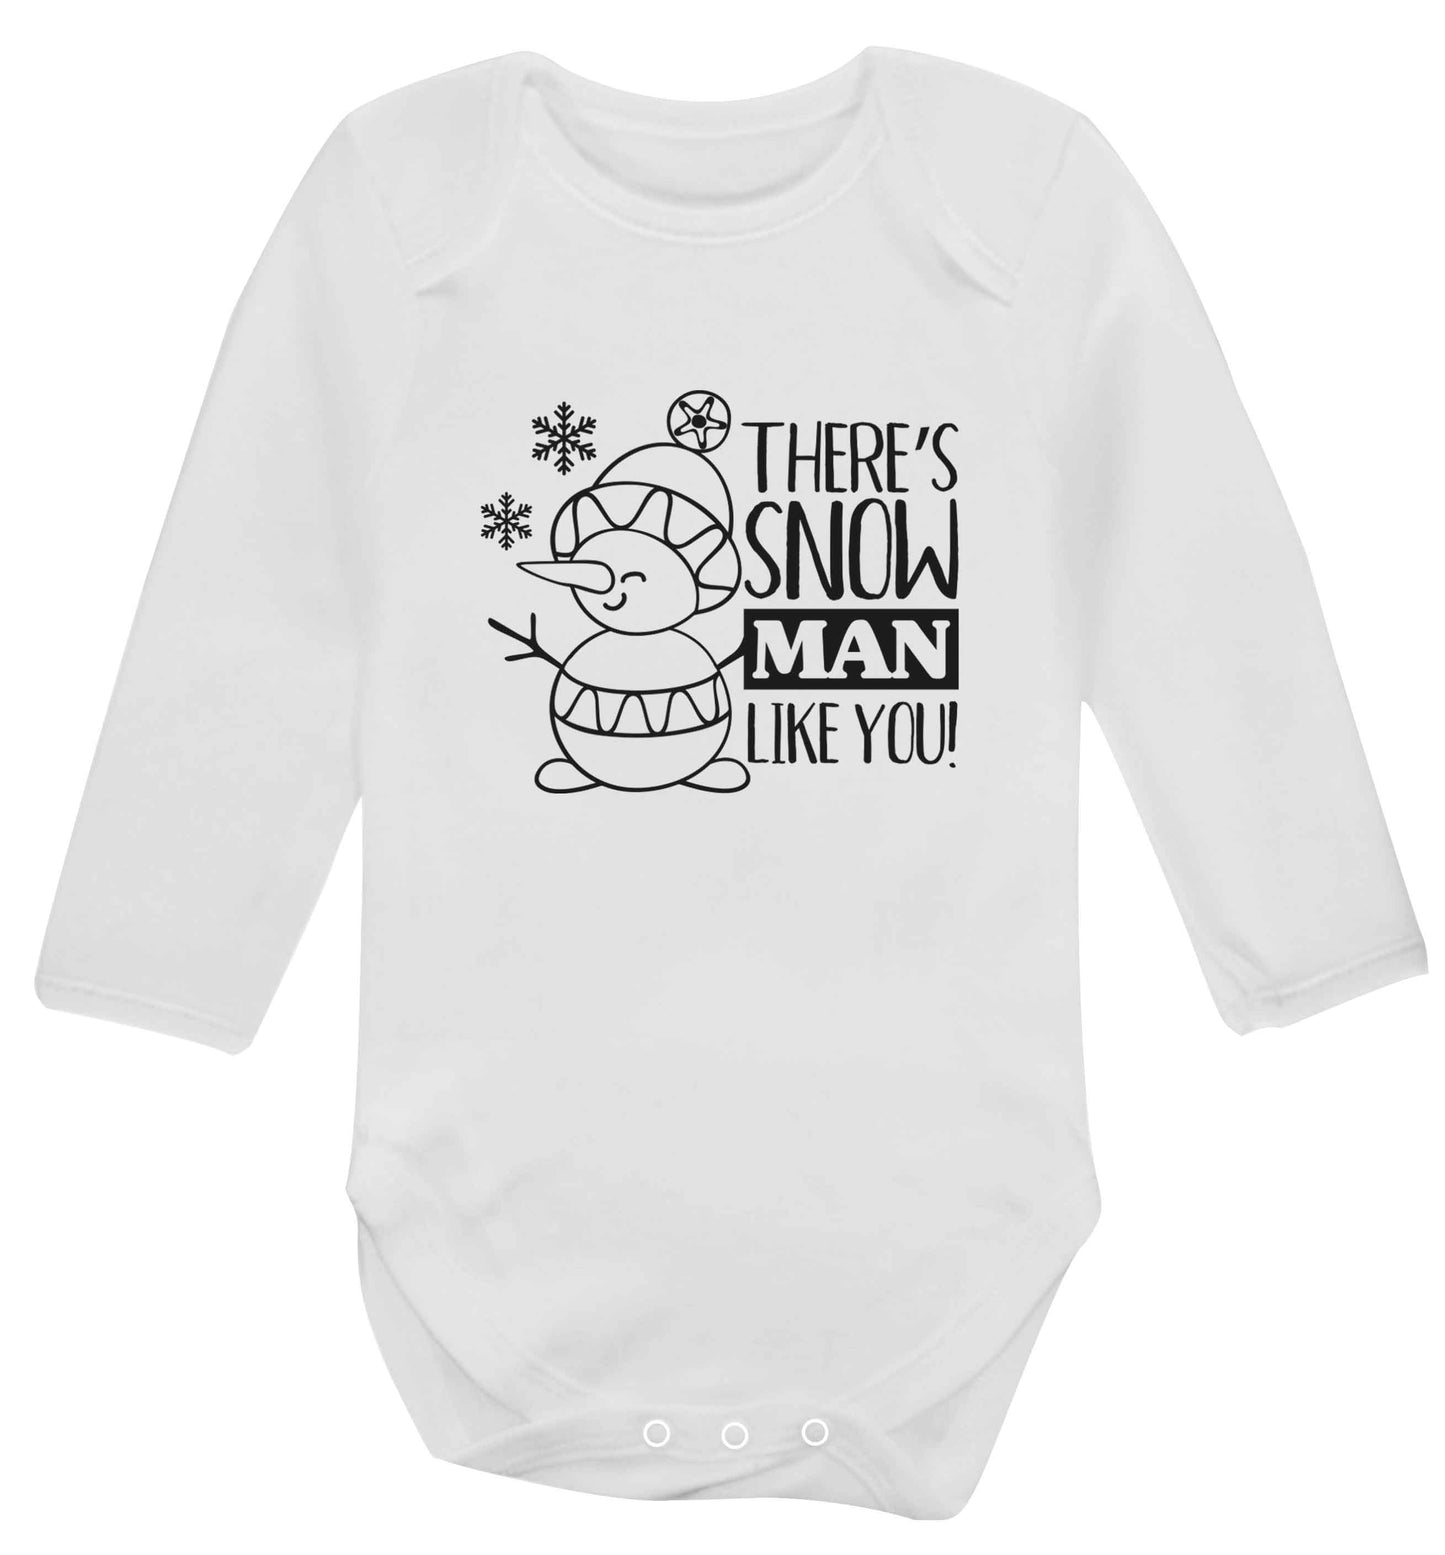 There's snow man like you baby vest long sleeved white 6-12 months